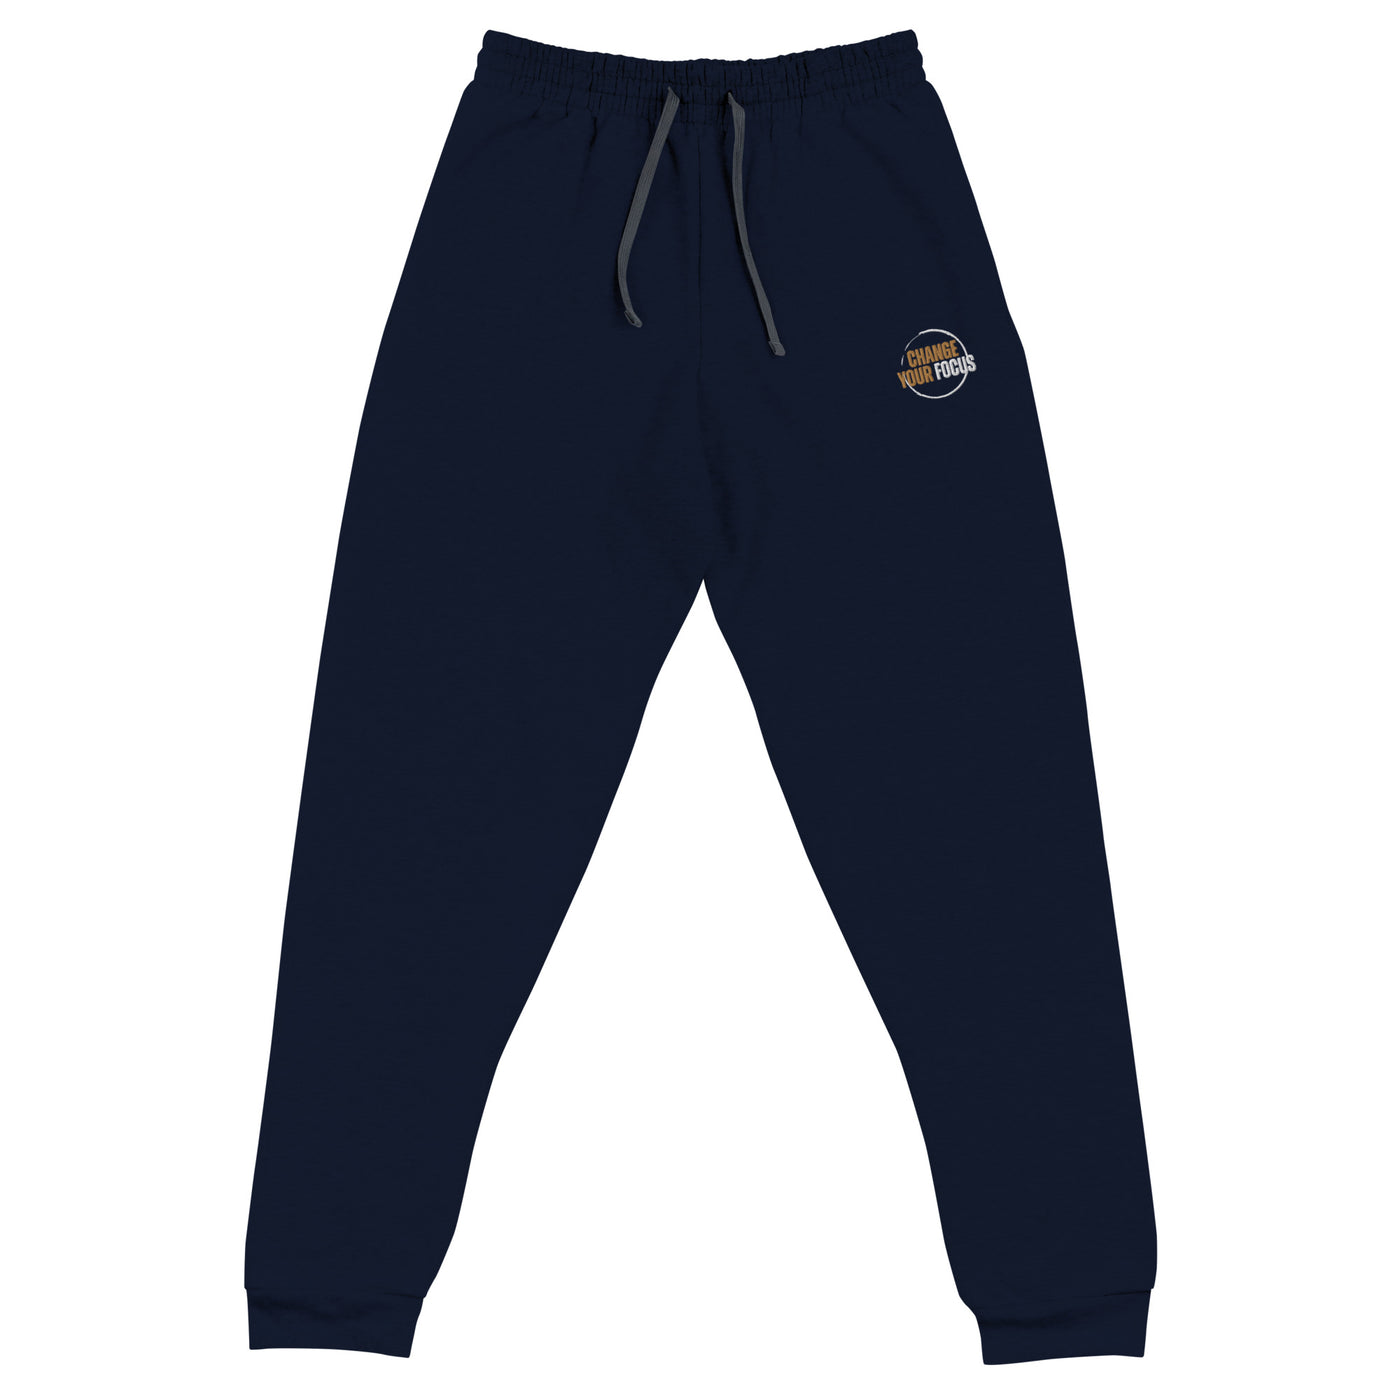 Women's Navy Embroidered Joggers - Change Your Focus